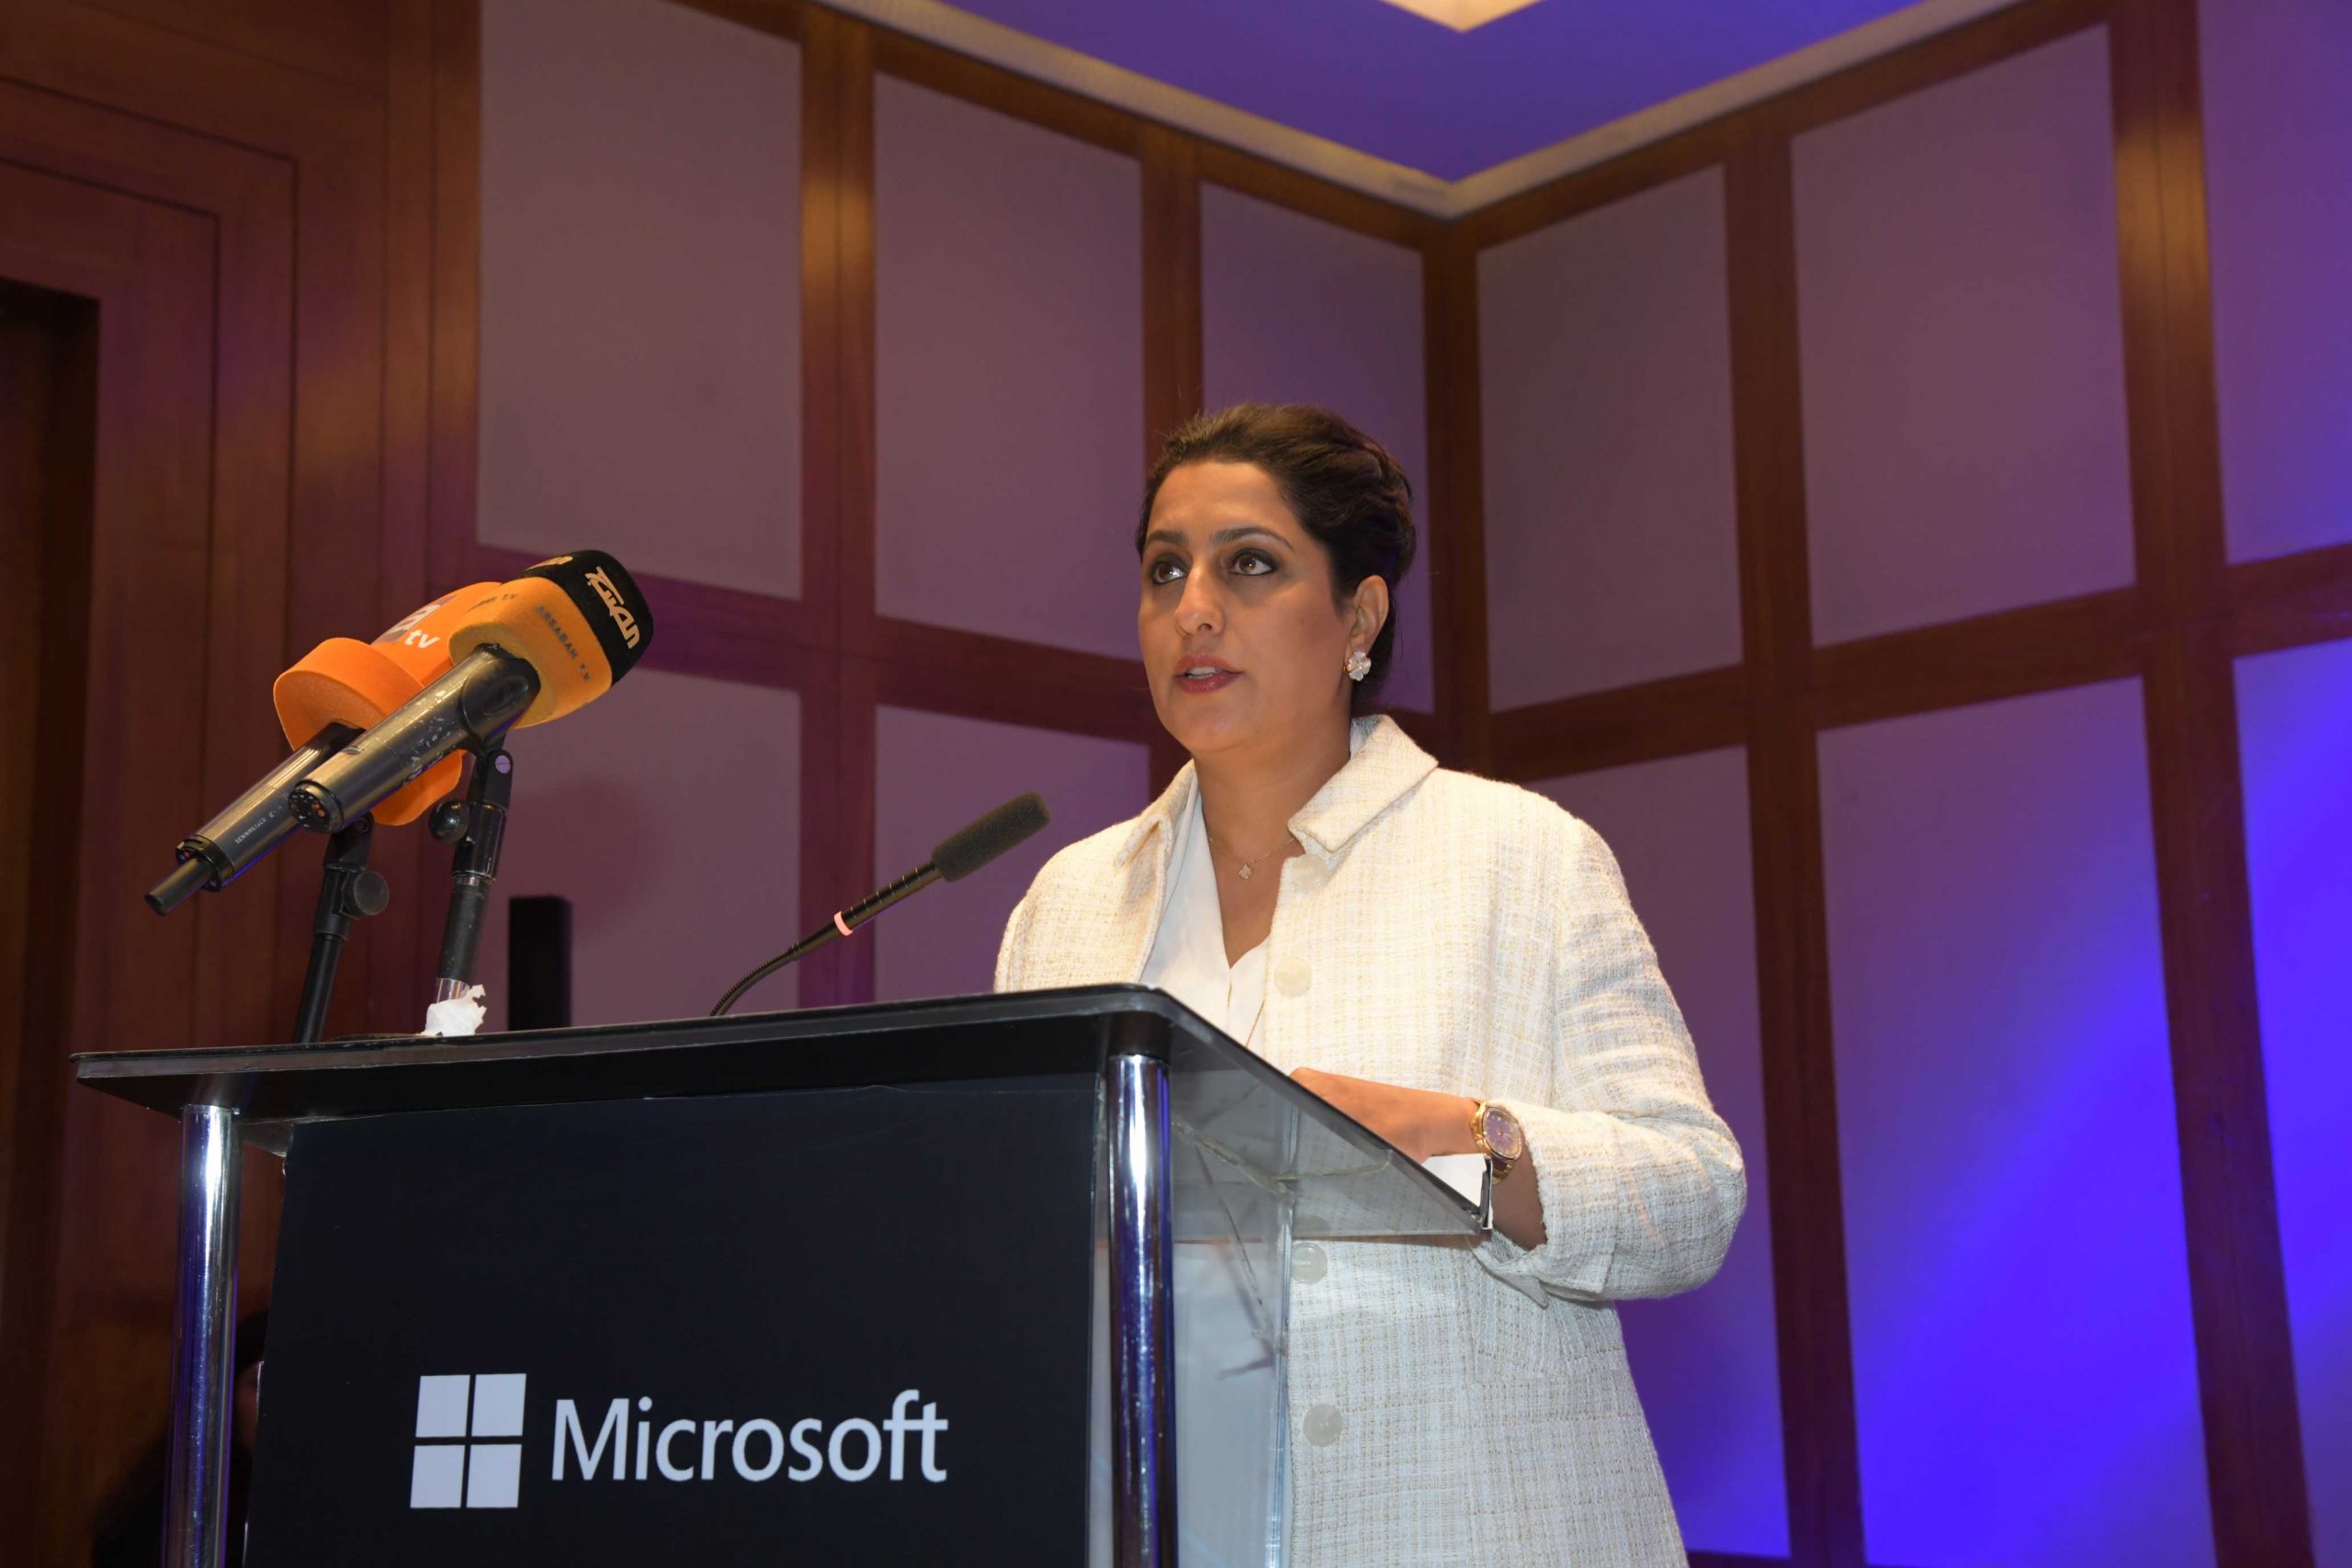 A picture of Mrs Haya AlWadaani, Director General at CAIT, giving her speech at the event